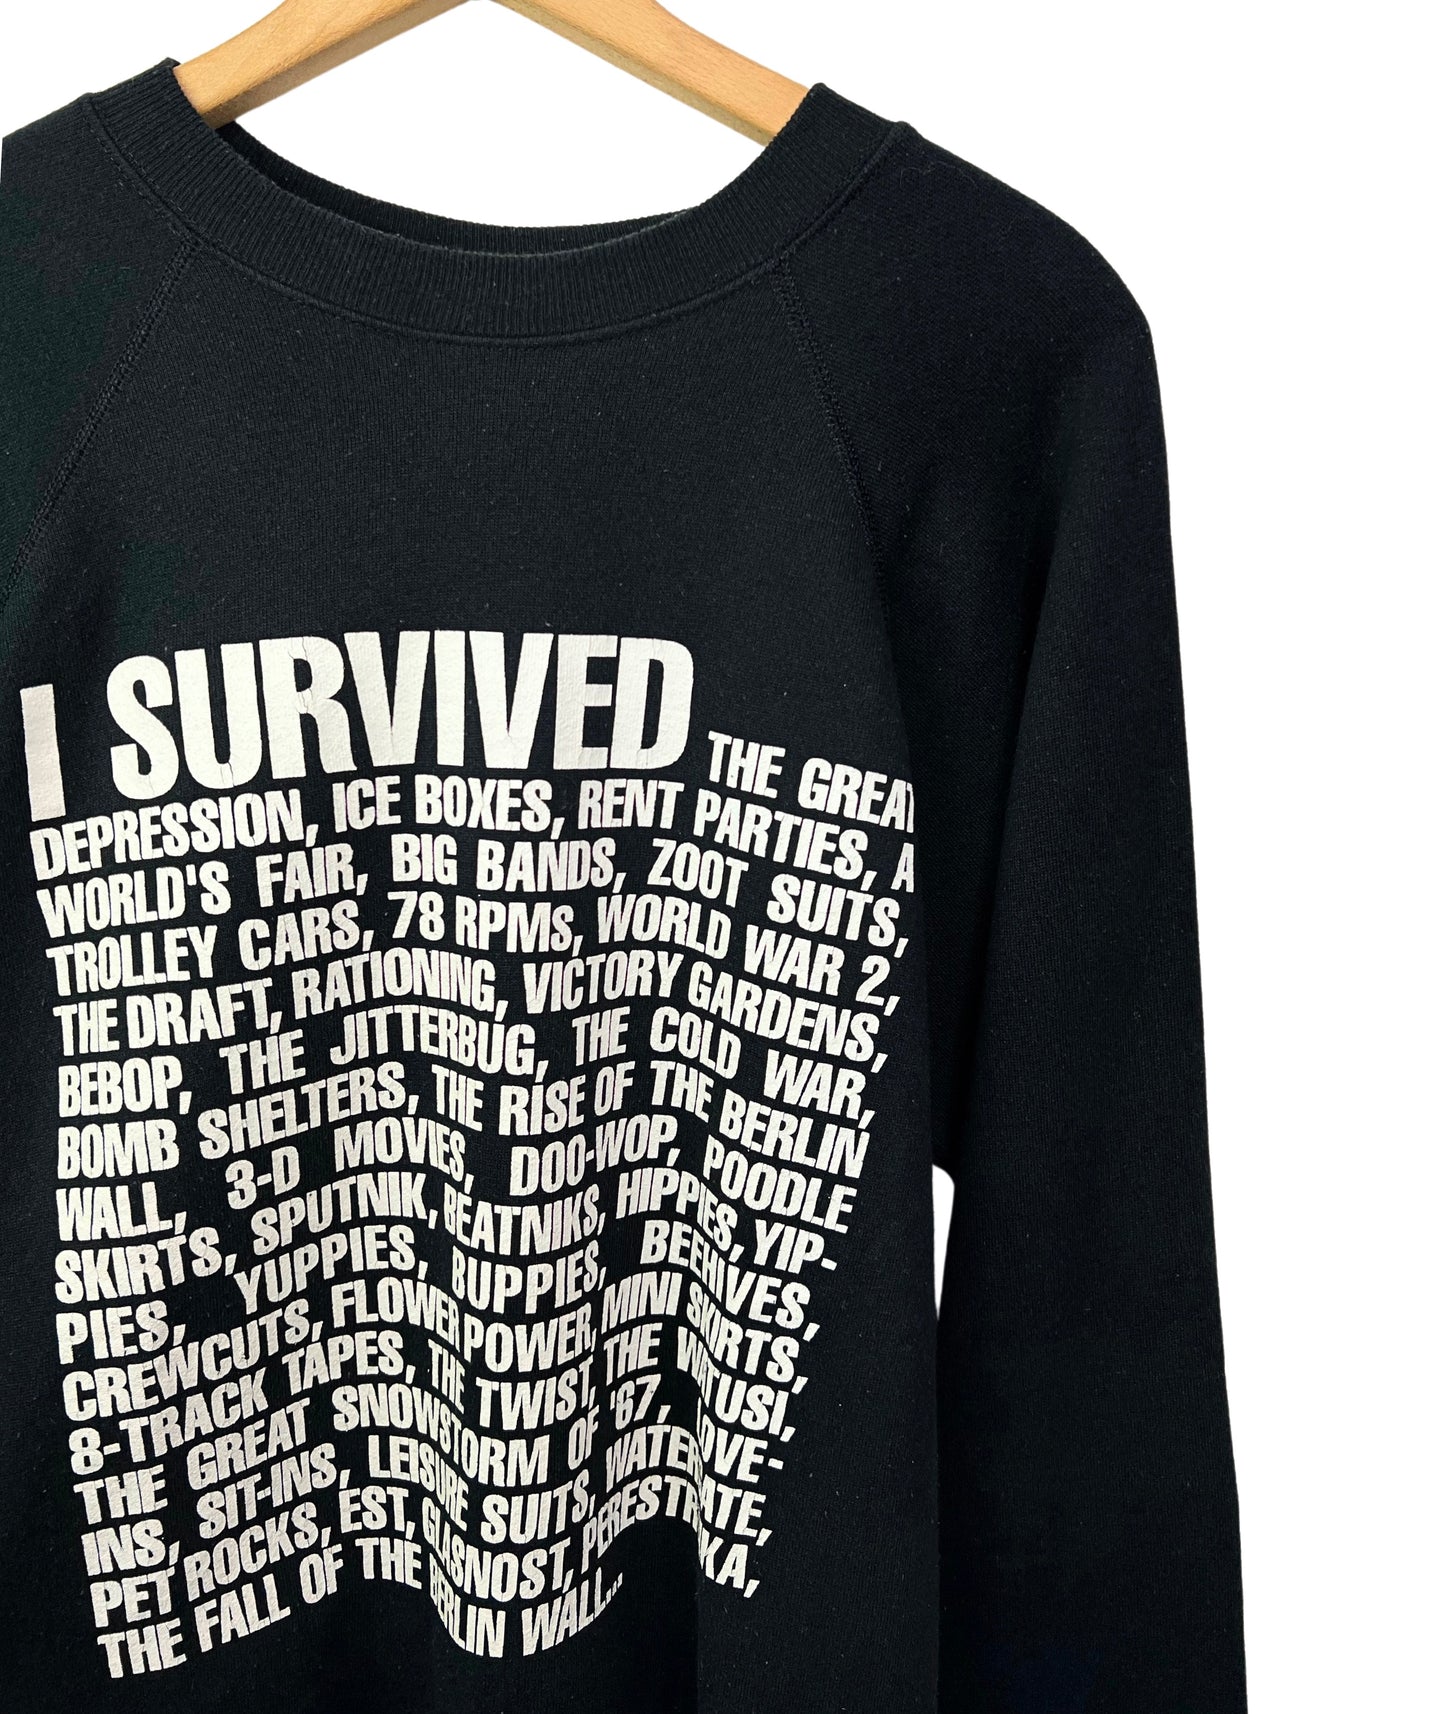 80’s I Survived Great Depression, Yuppies, Cold War, Snowstorm of 67 Funny Sweatshirt Size XL